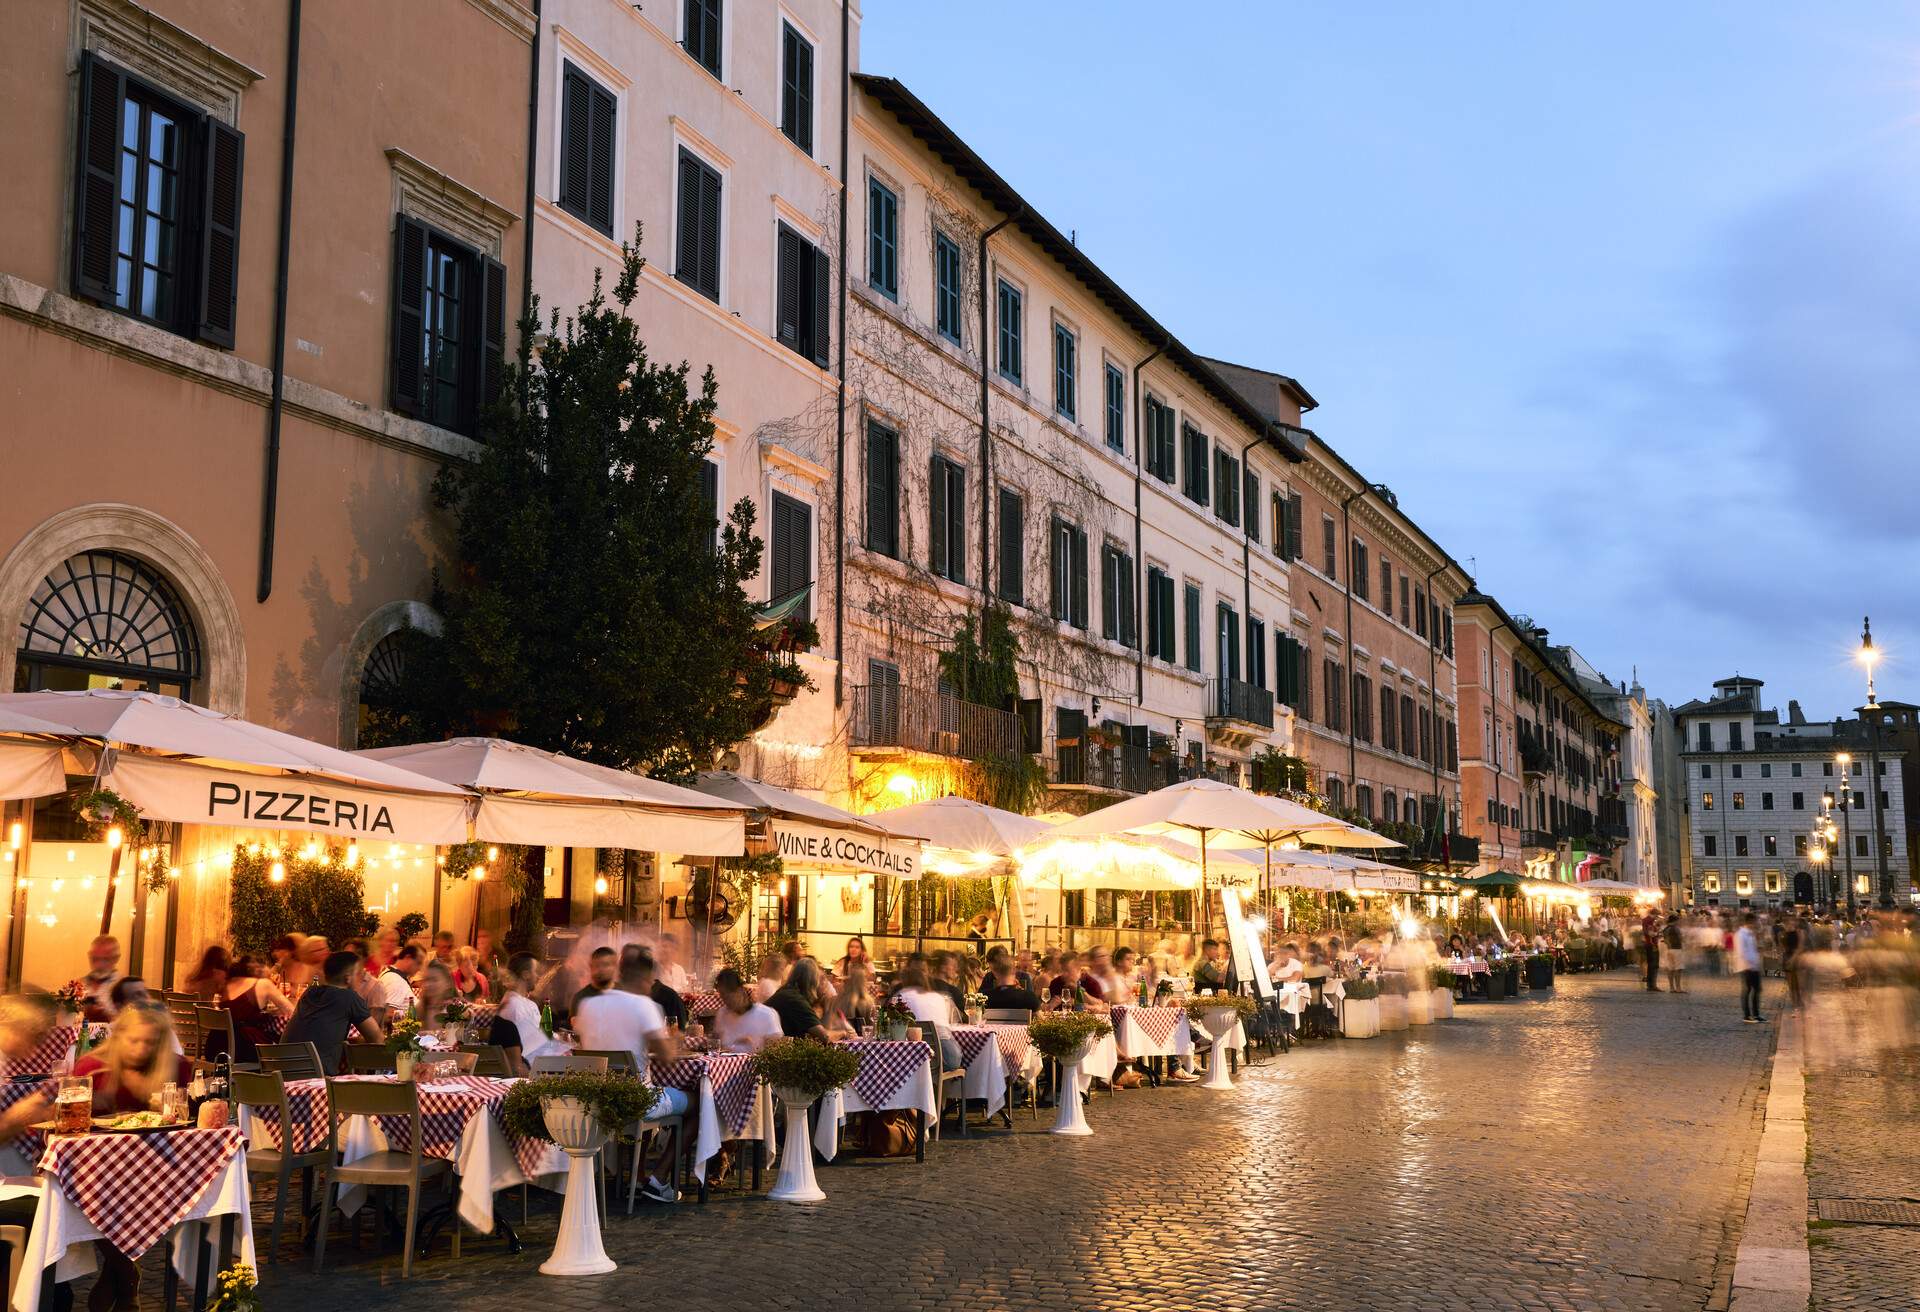 dest_italy_rome_piazza-navona_theme_restaurant_gettyimages-1350637550_universal_within-usage-period_83788.jpg